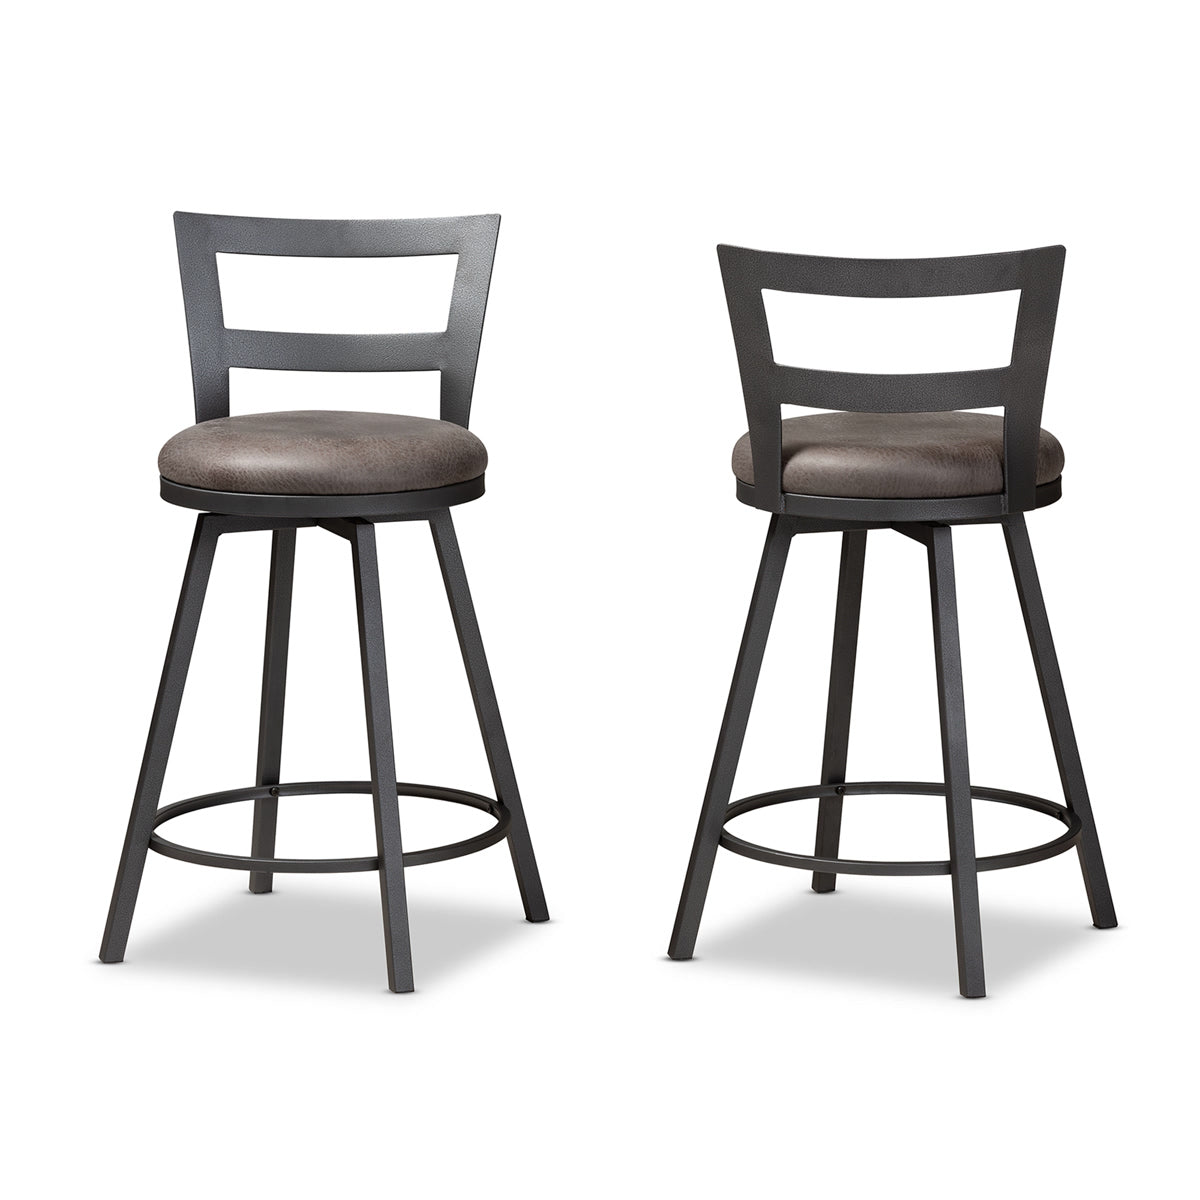 Baxton Studio Arjean Rustic and Industrial Grey Fabric Upholstered Counter Stool Set of 2 Baxton Studio-0-Minimal And Modern - 2